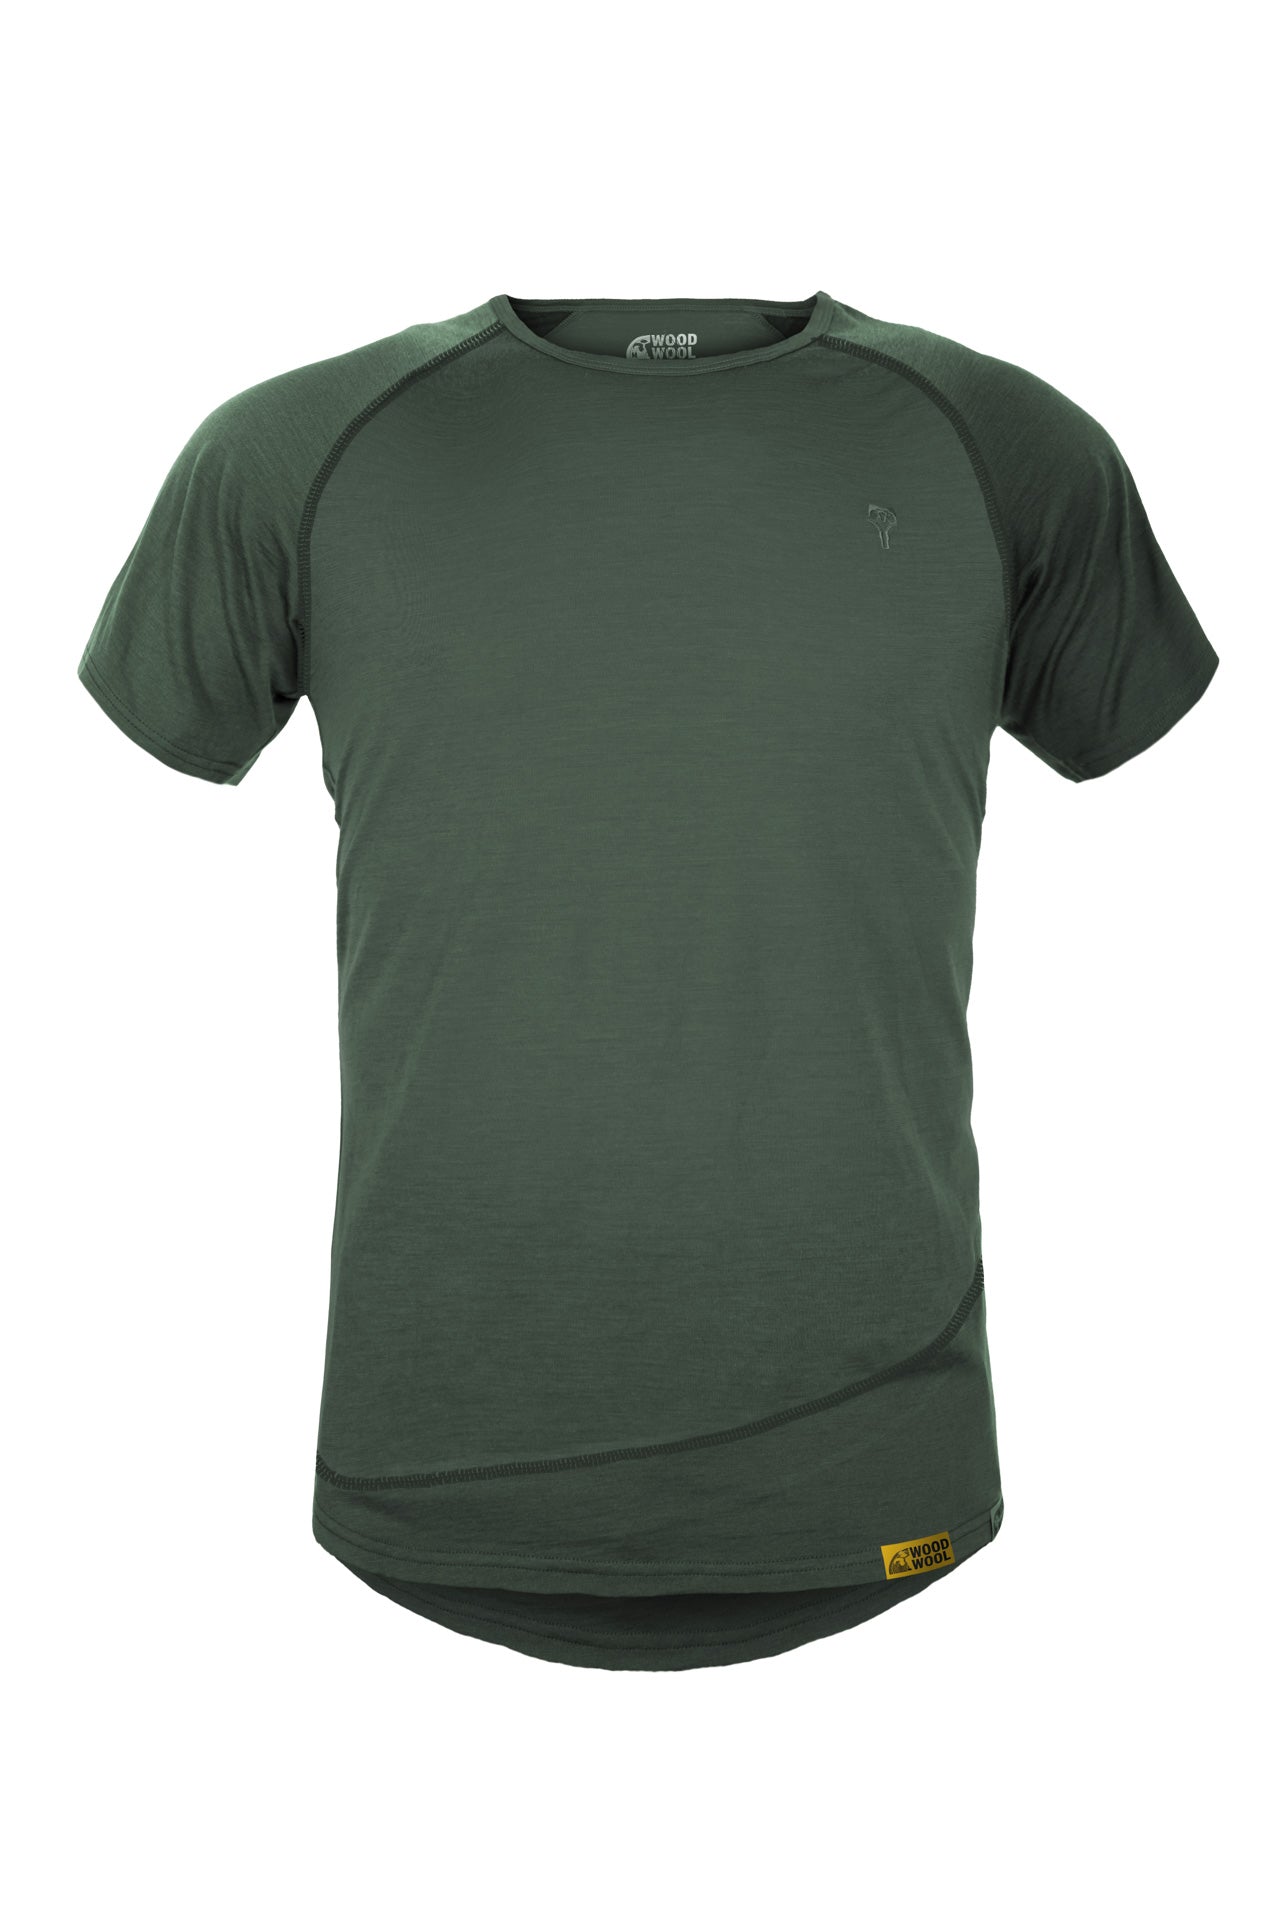 WoodWool T-Shirt Mr. Pike | Bayberry Green